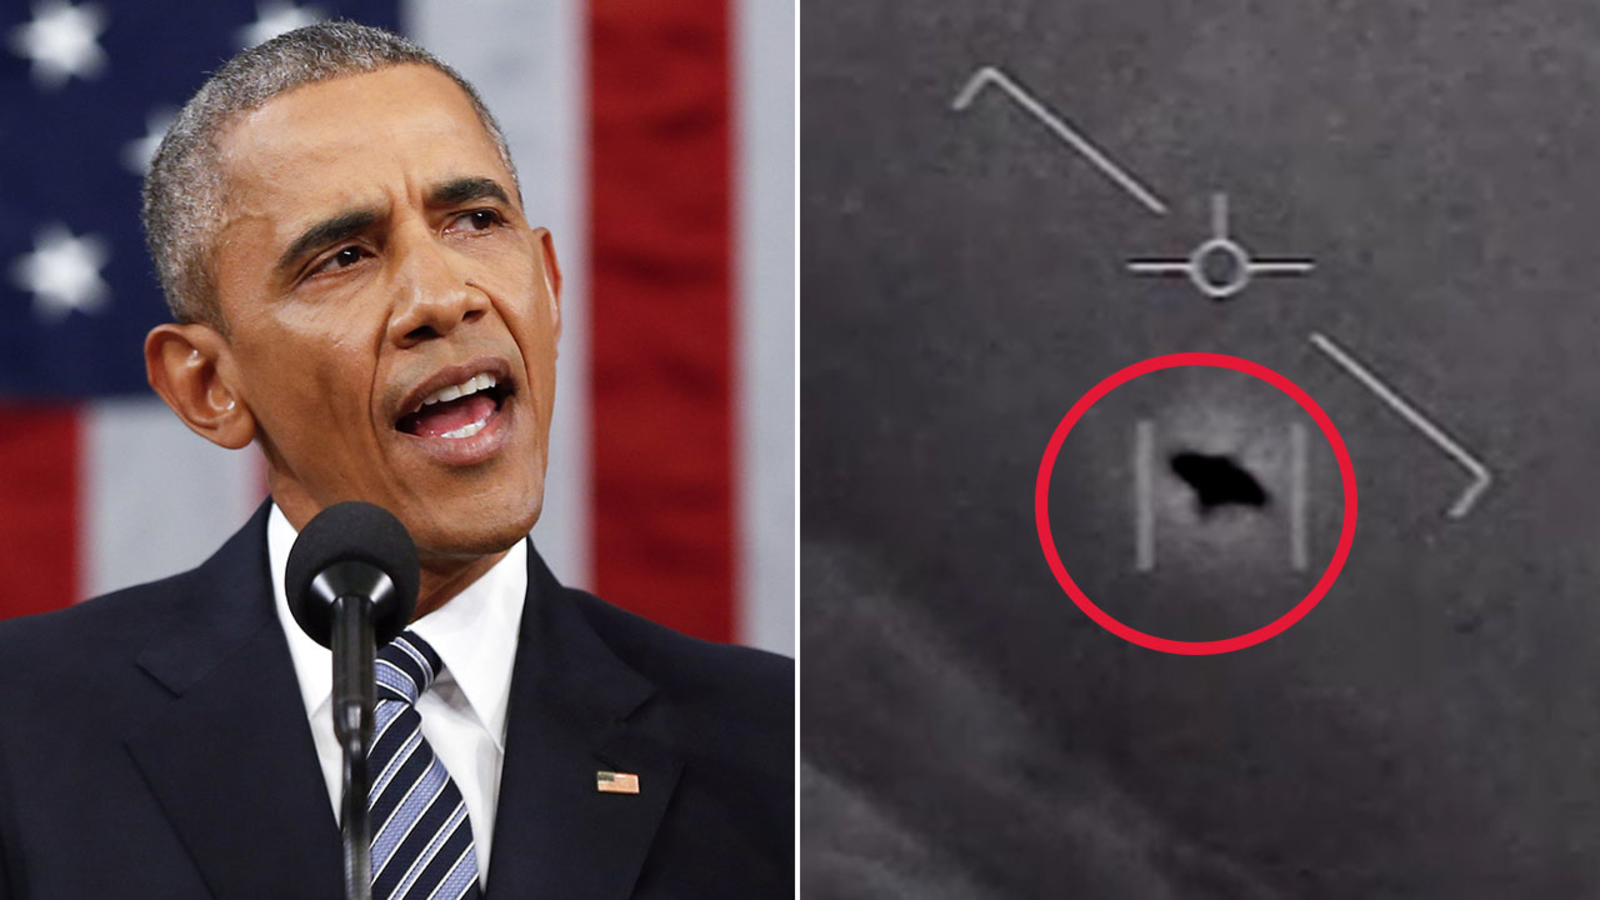 Barack Obama Just Said Something Very Interesting About Ufos